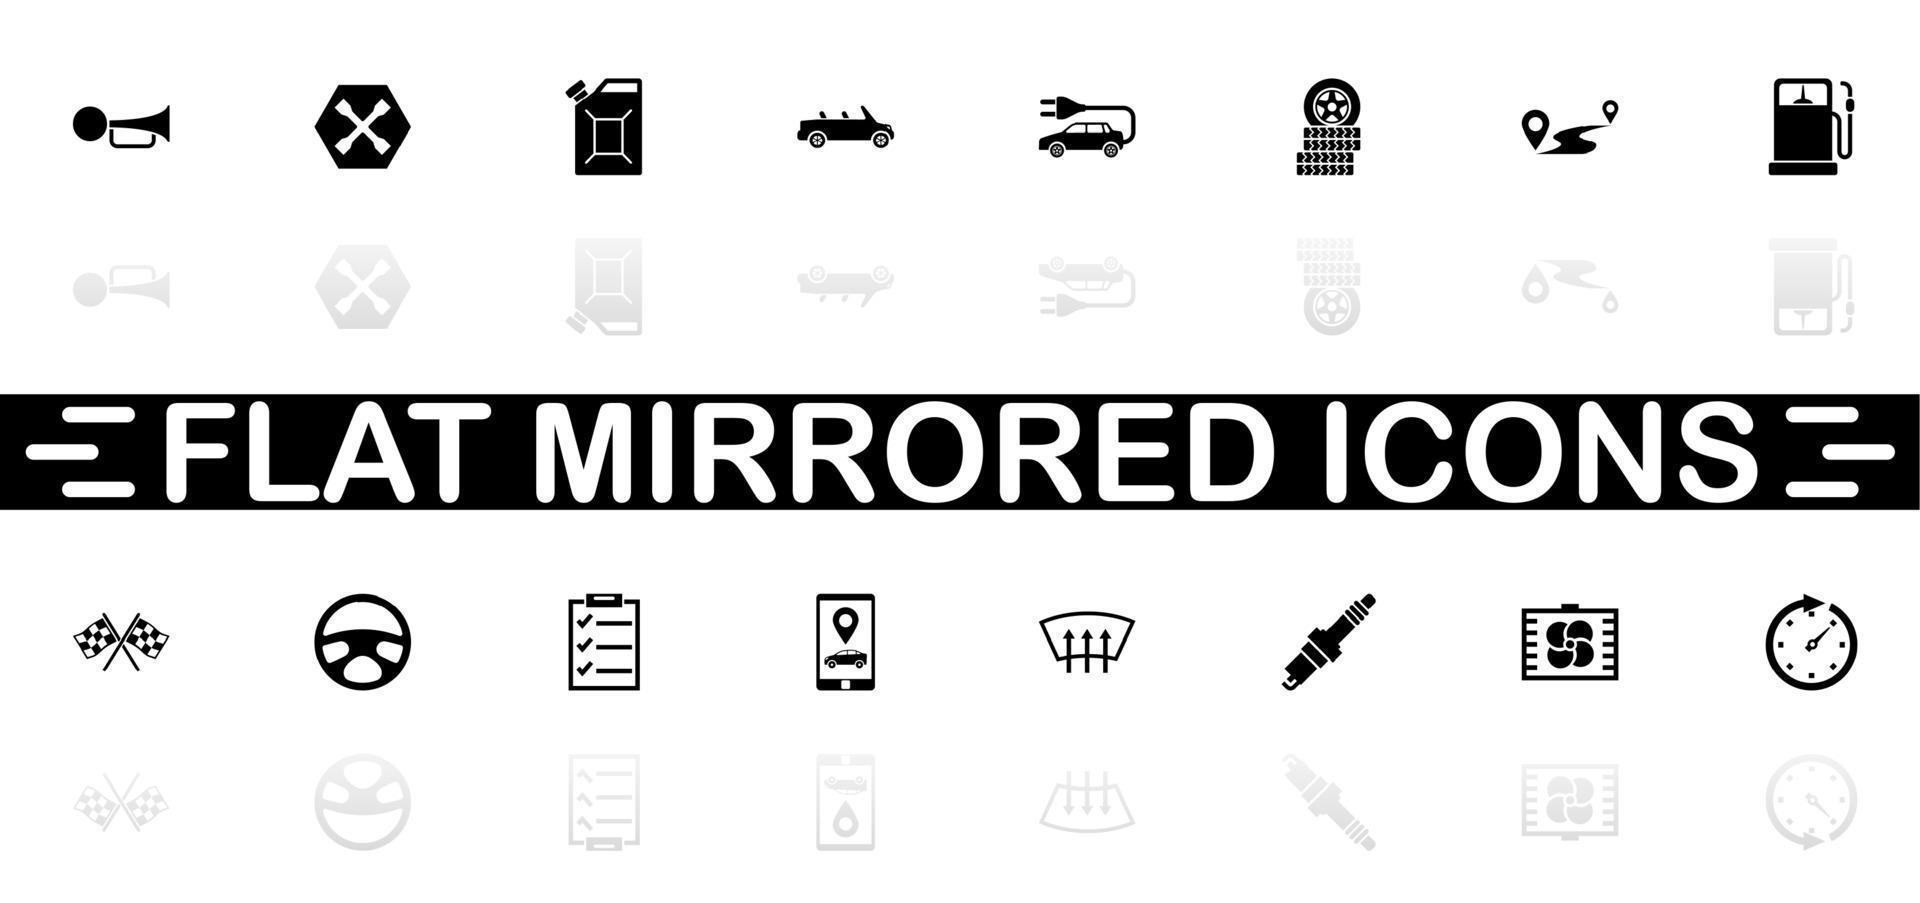 Automobile icons - Black symbol on white background. Simple illustration. Flat Vector Icon. Mirror Reflection Shadow. Can be used in logo, web, mobile and UI UX project.